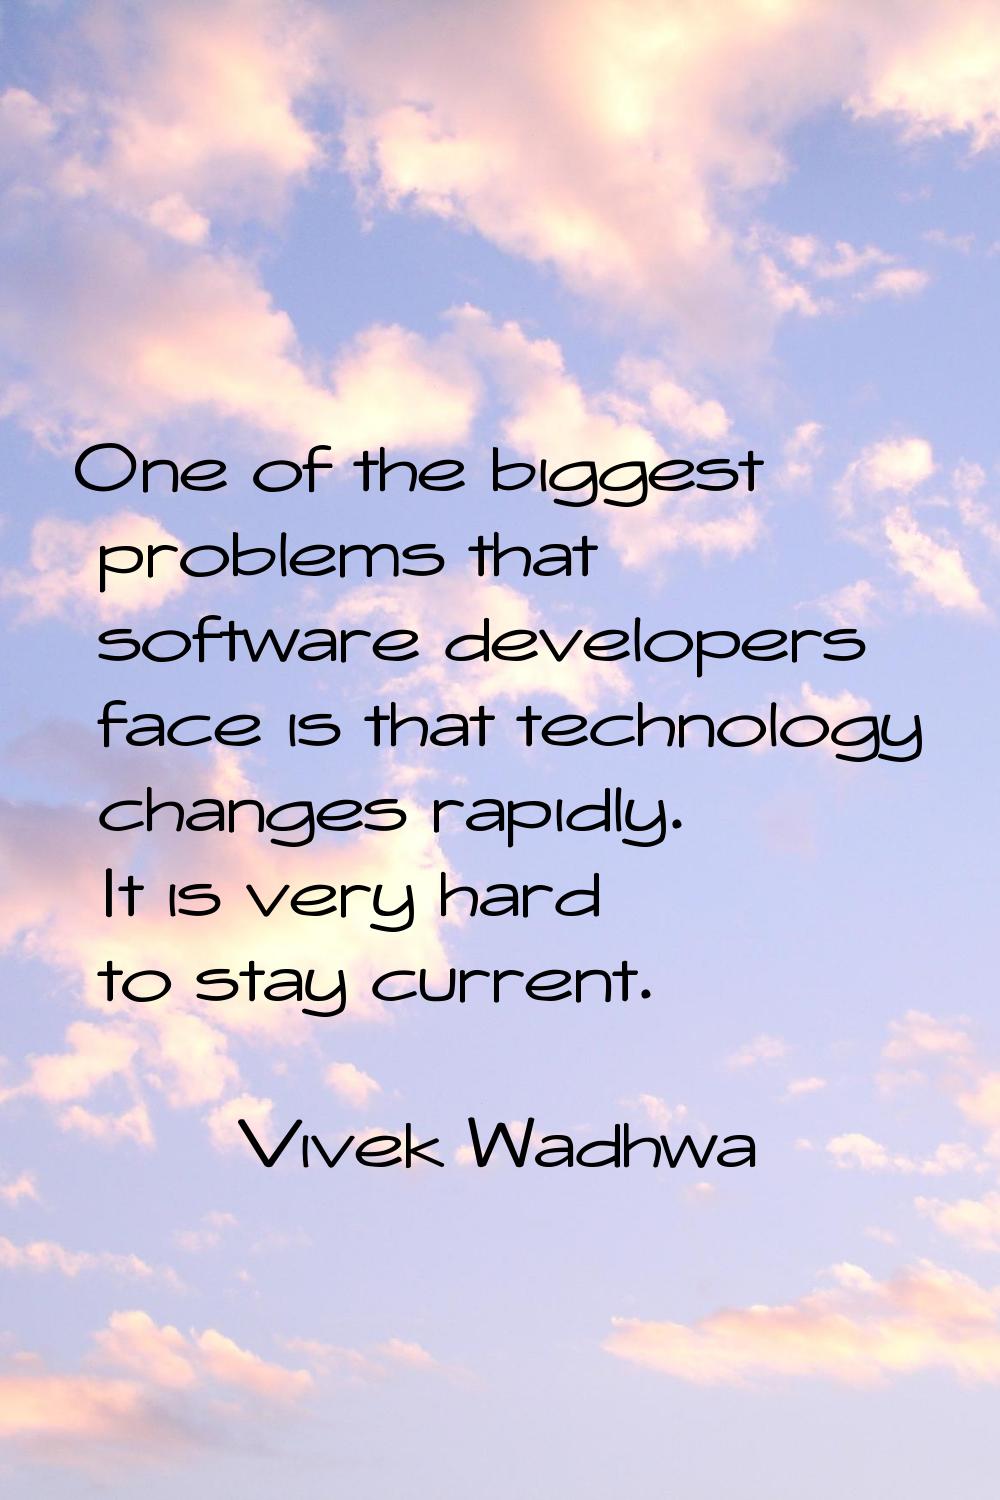 One of the biggest problems that software developers face is that technology changes rapidly. It is